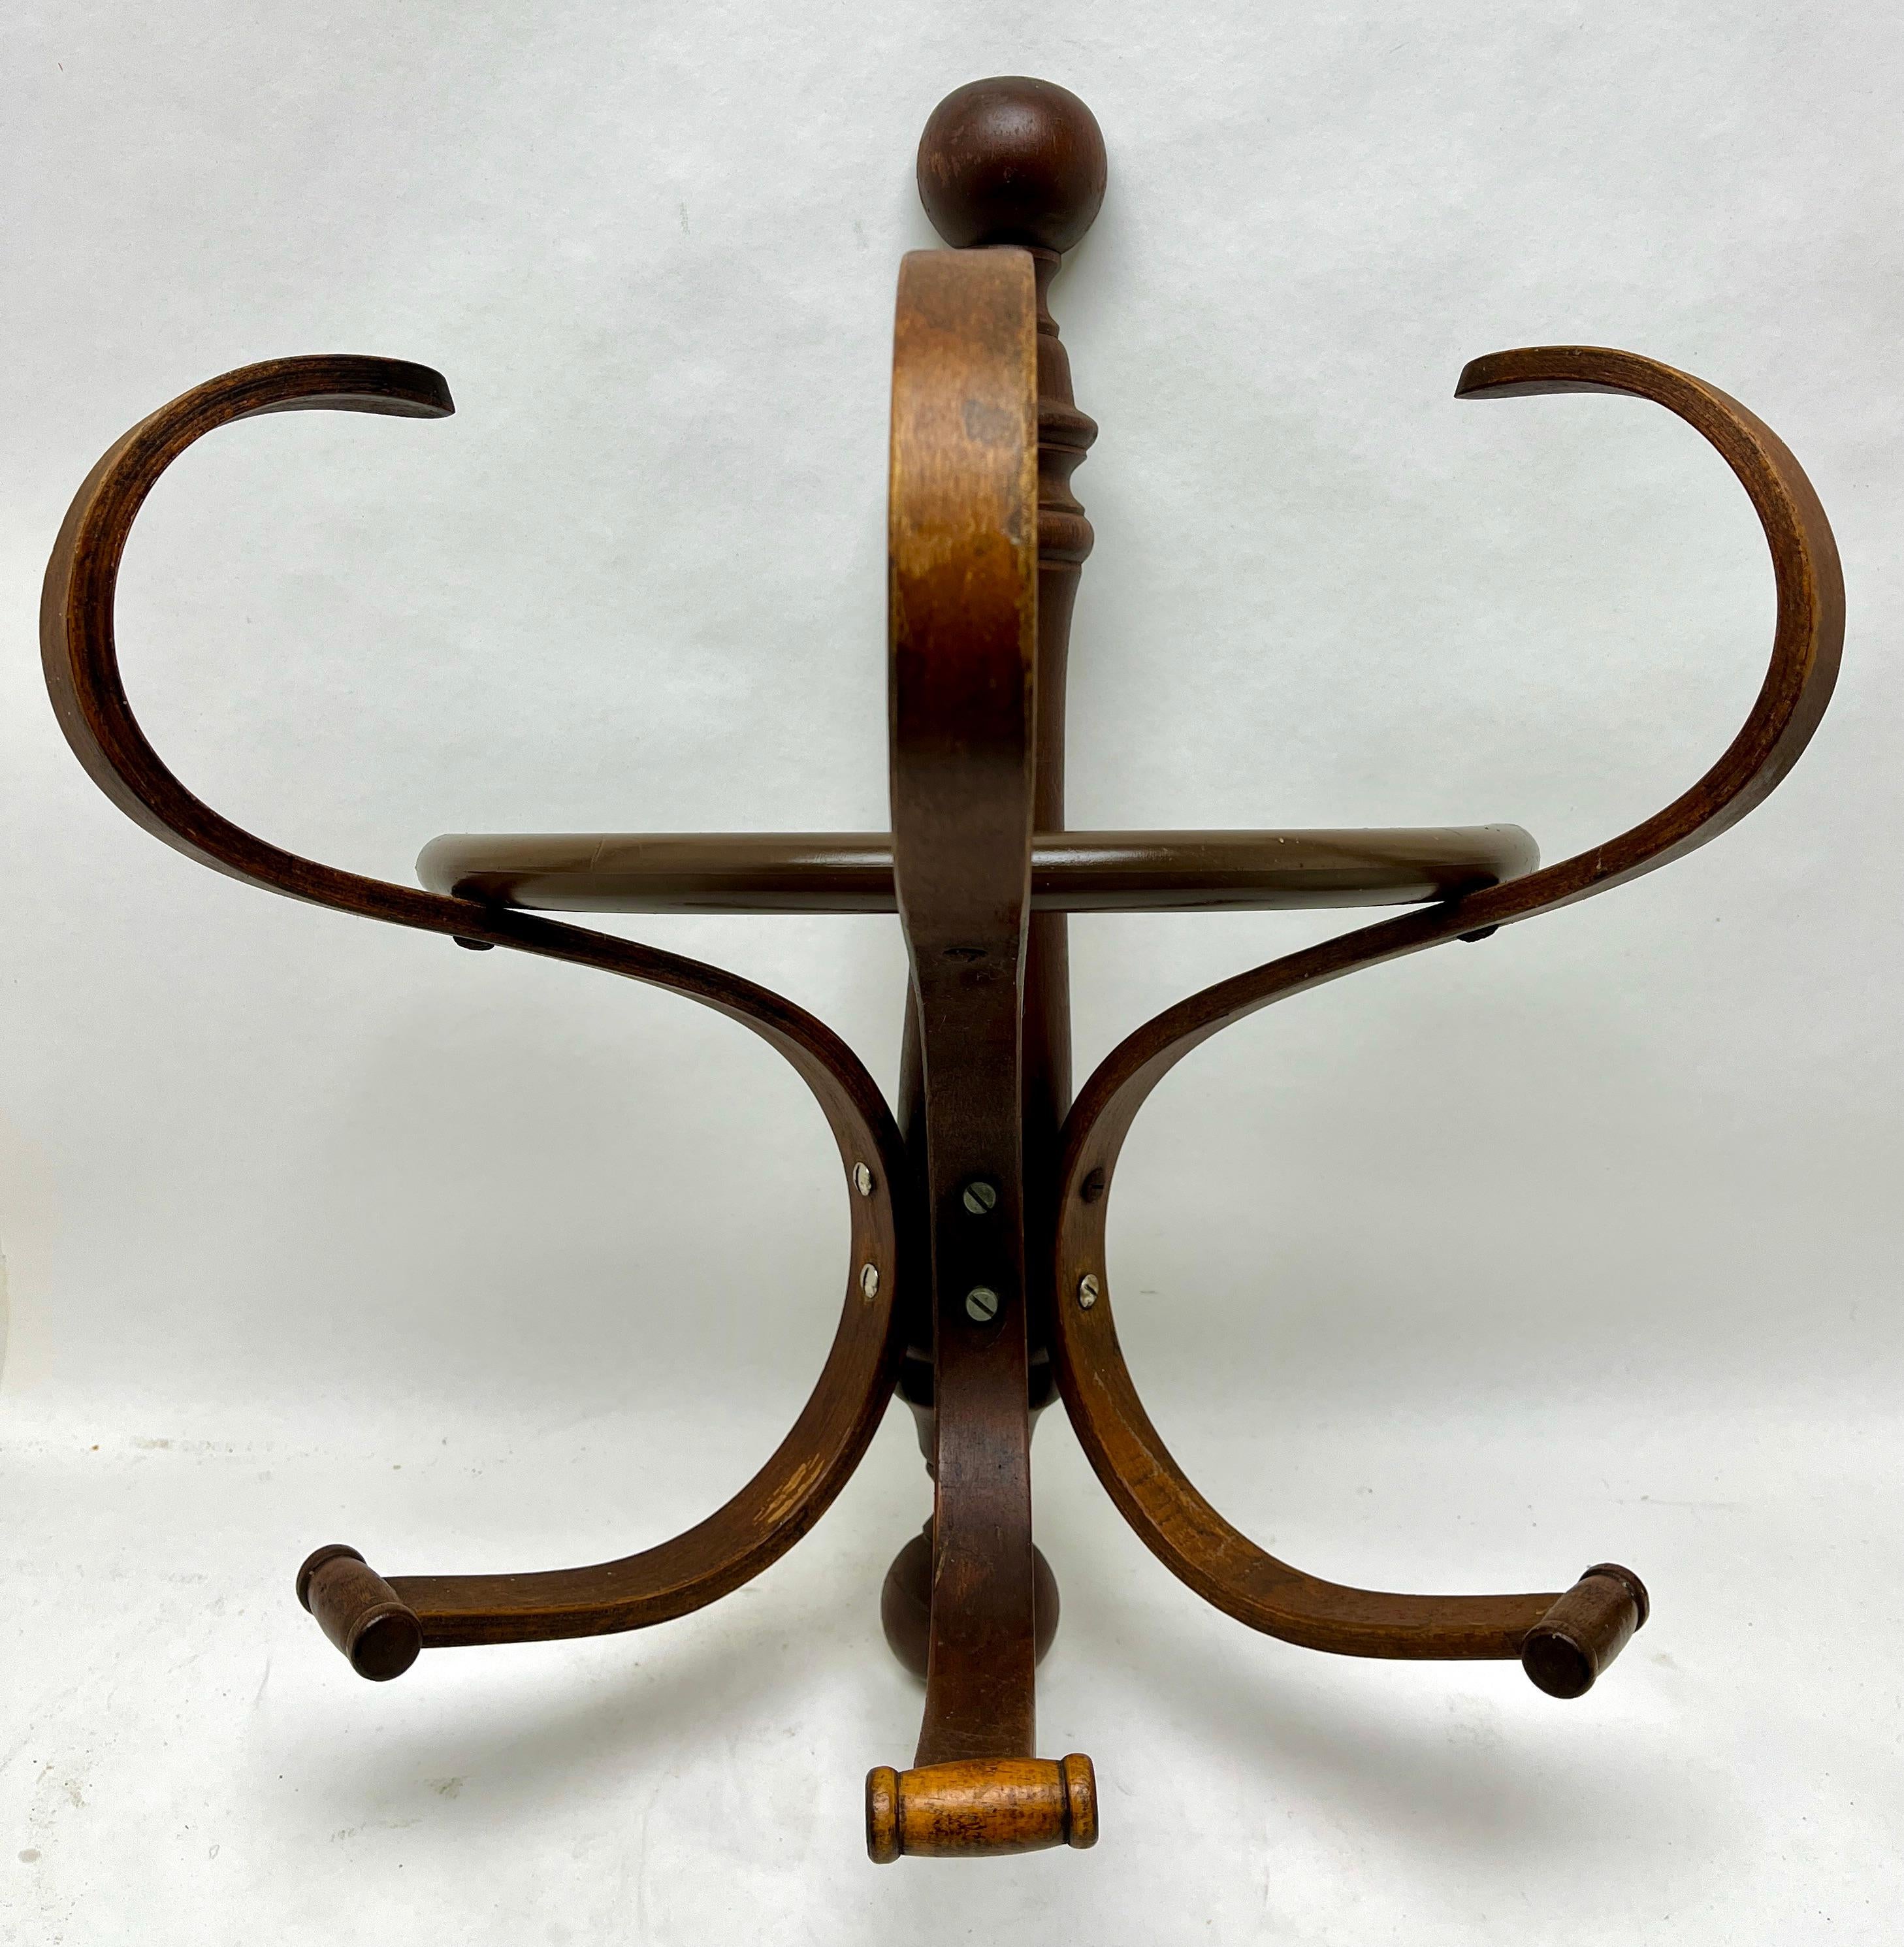 Art Nouveau Bentwood Wall Coat Rack Attributed to Thonet, Vienna, 1910s 1